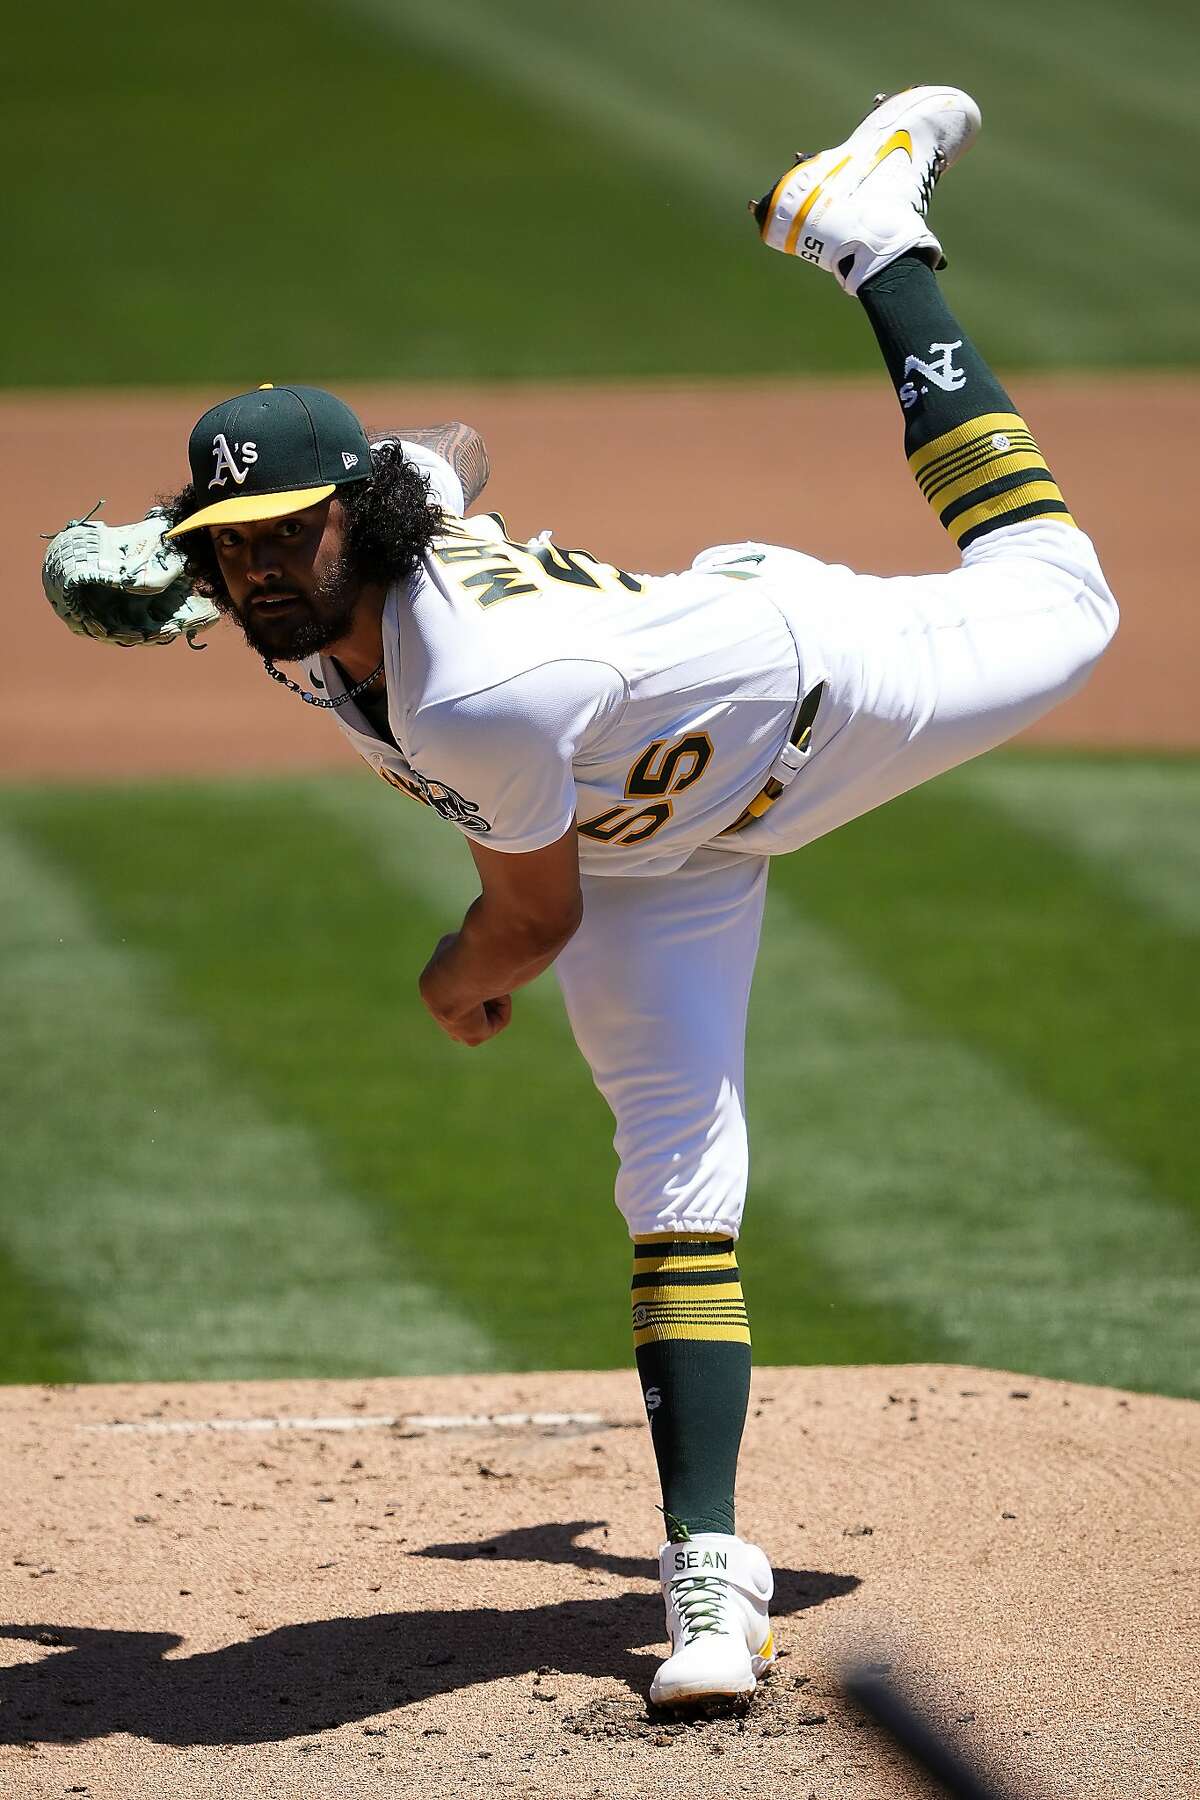 Oakland Athletics starting pitcher Sean Manaea throws against the Arizona Diamondbacks during the first inning of a baseball game Wednesday, June 9, 2021, in Oakland, Calif. (AP Photo/Tony Avelar)